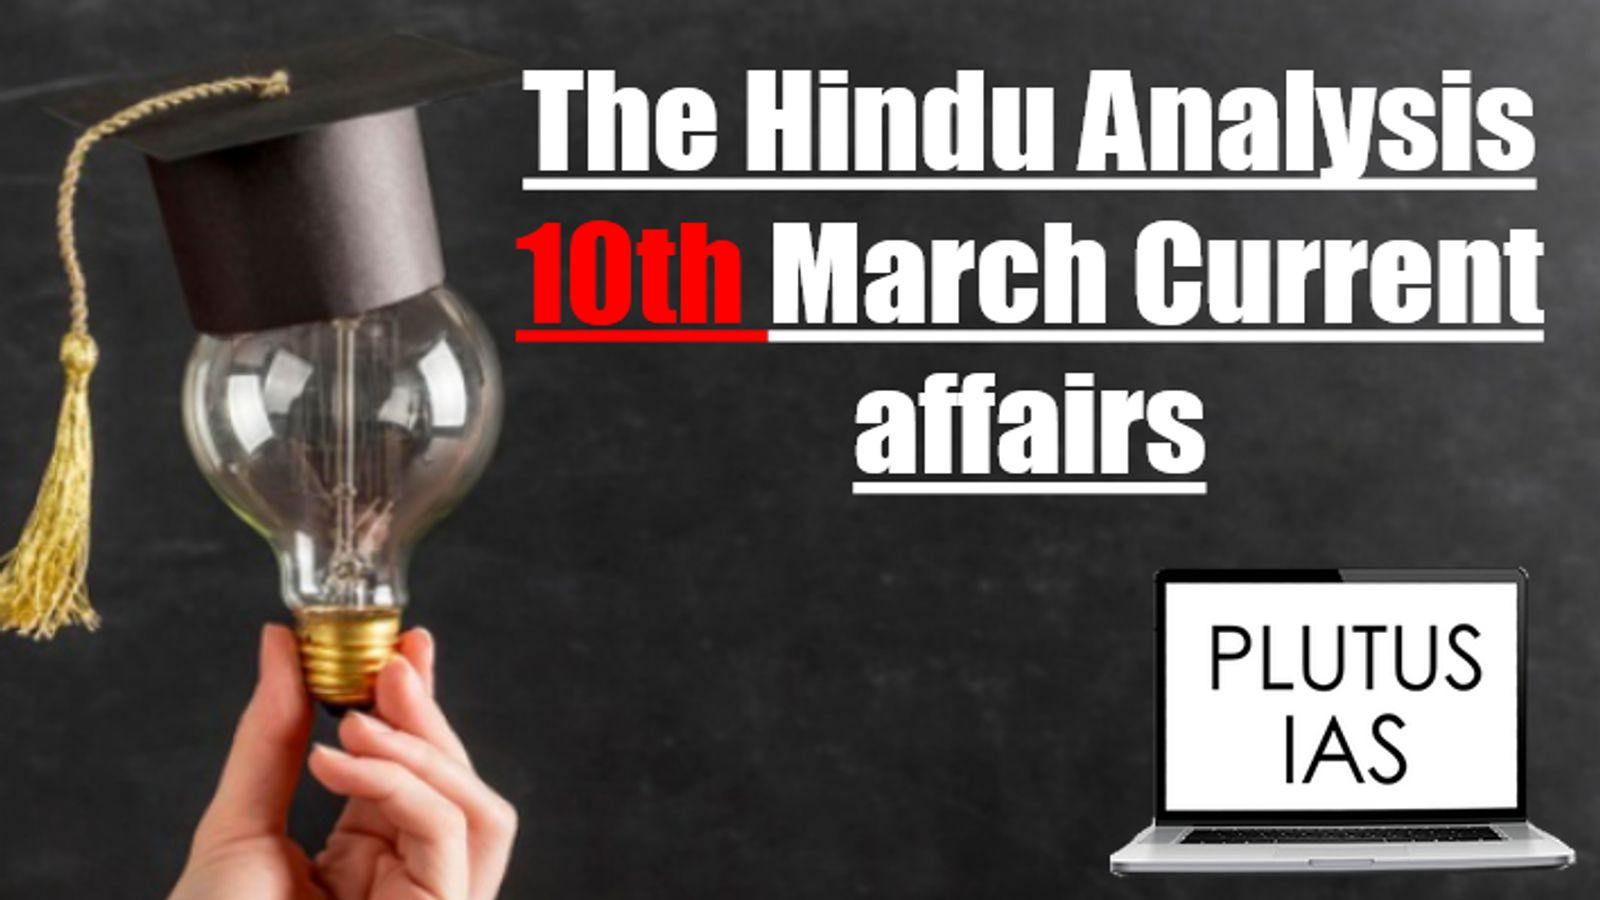 The Hindu Analysis 10th March Current Affairs